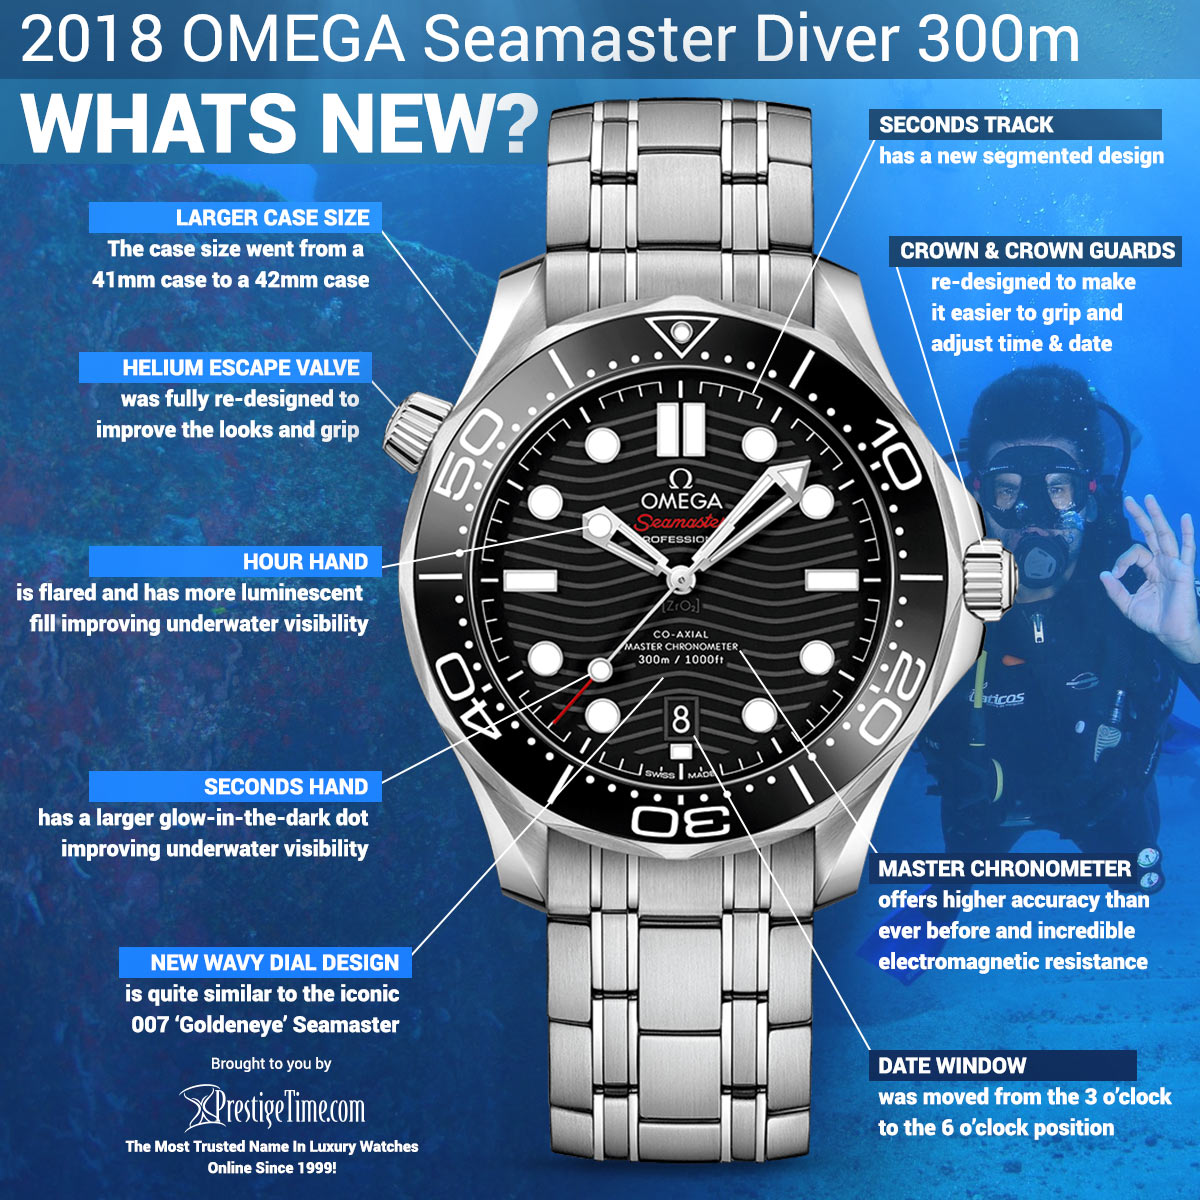 Review of the 2018 Seamaster Diver 300m Master Chronometer 